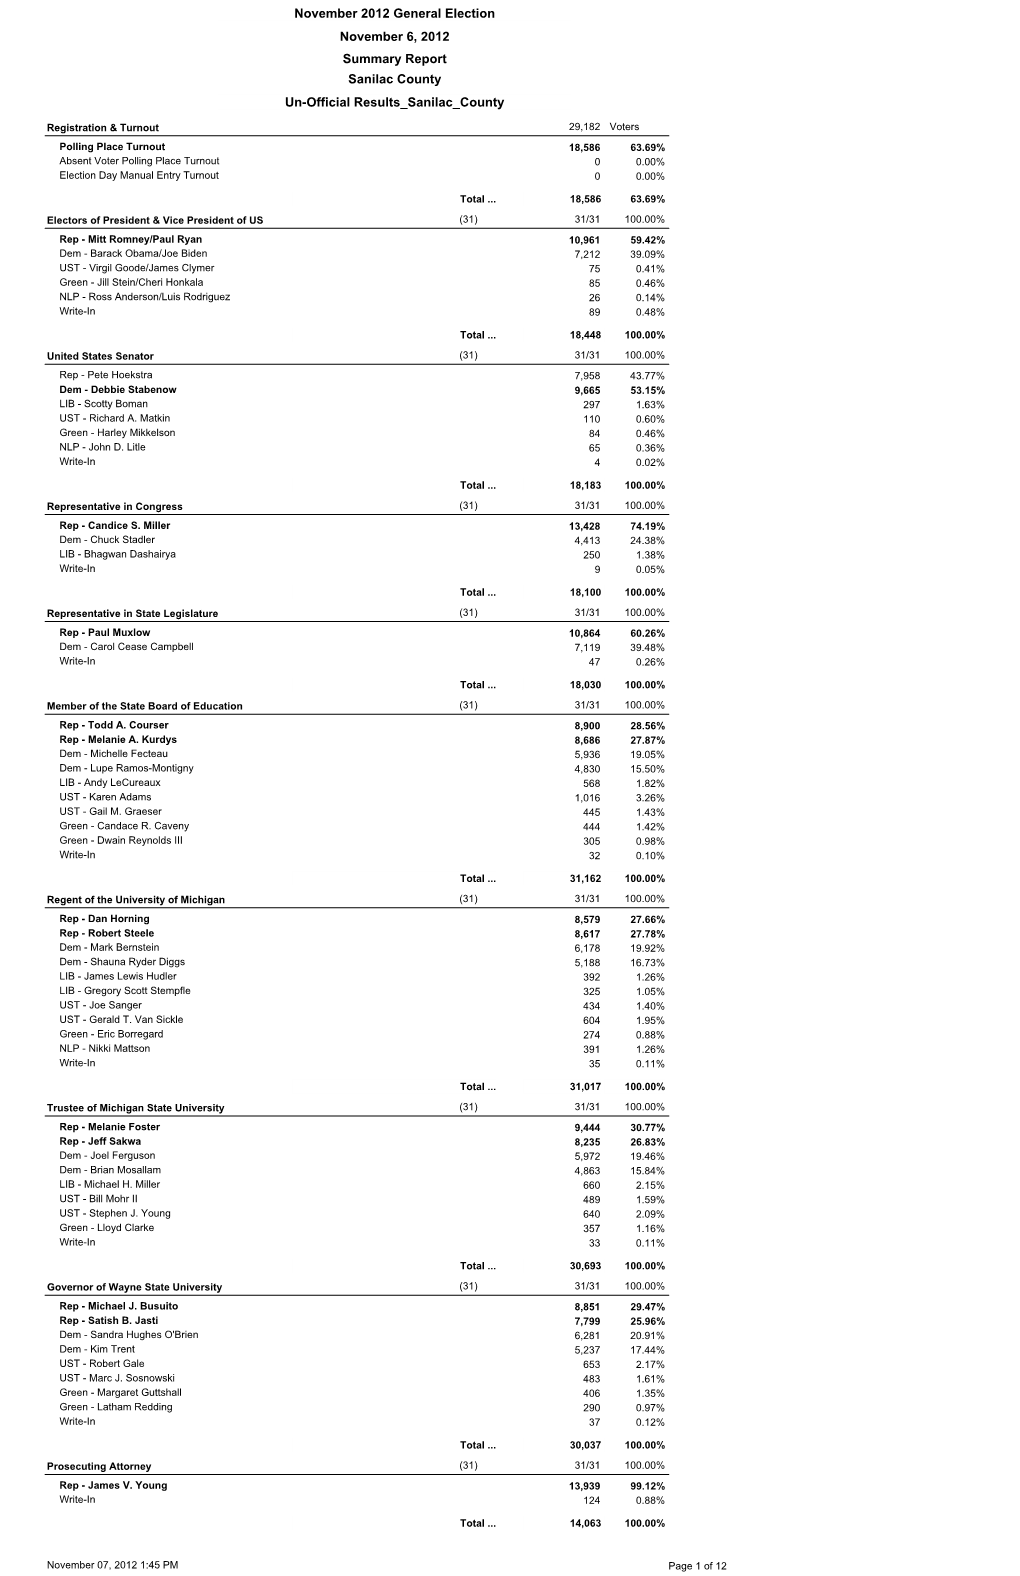 Summary Report Sanilac County Un-Official Results Sanilac County